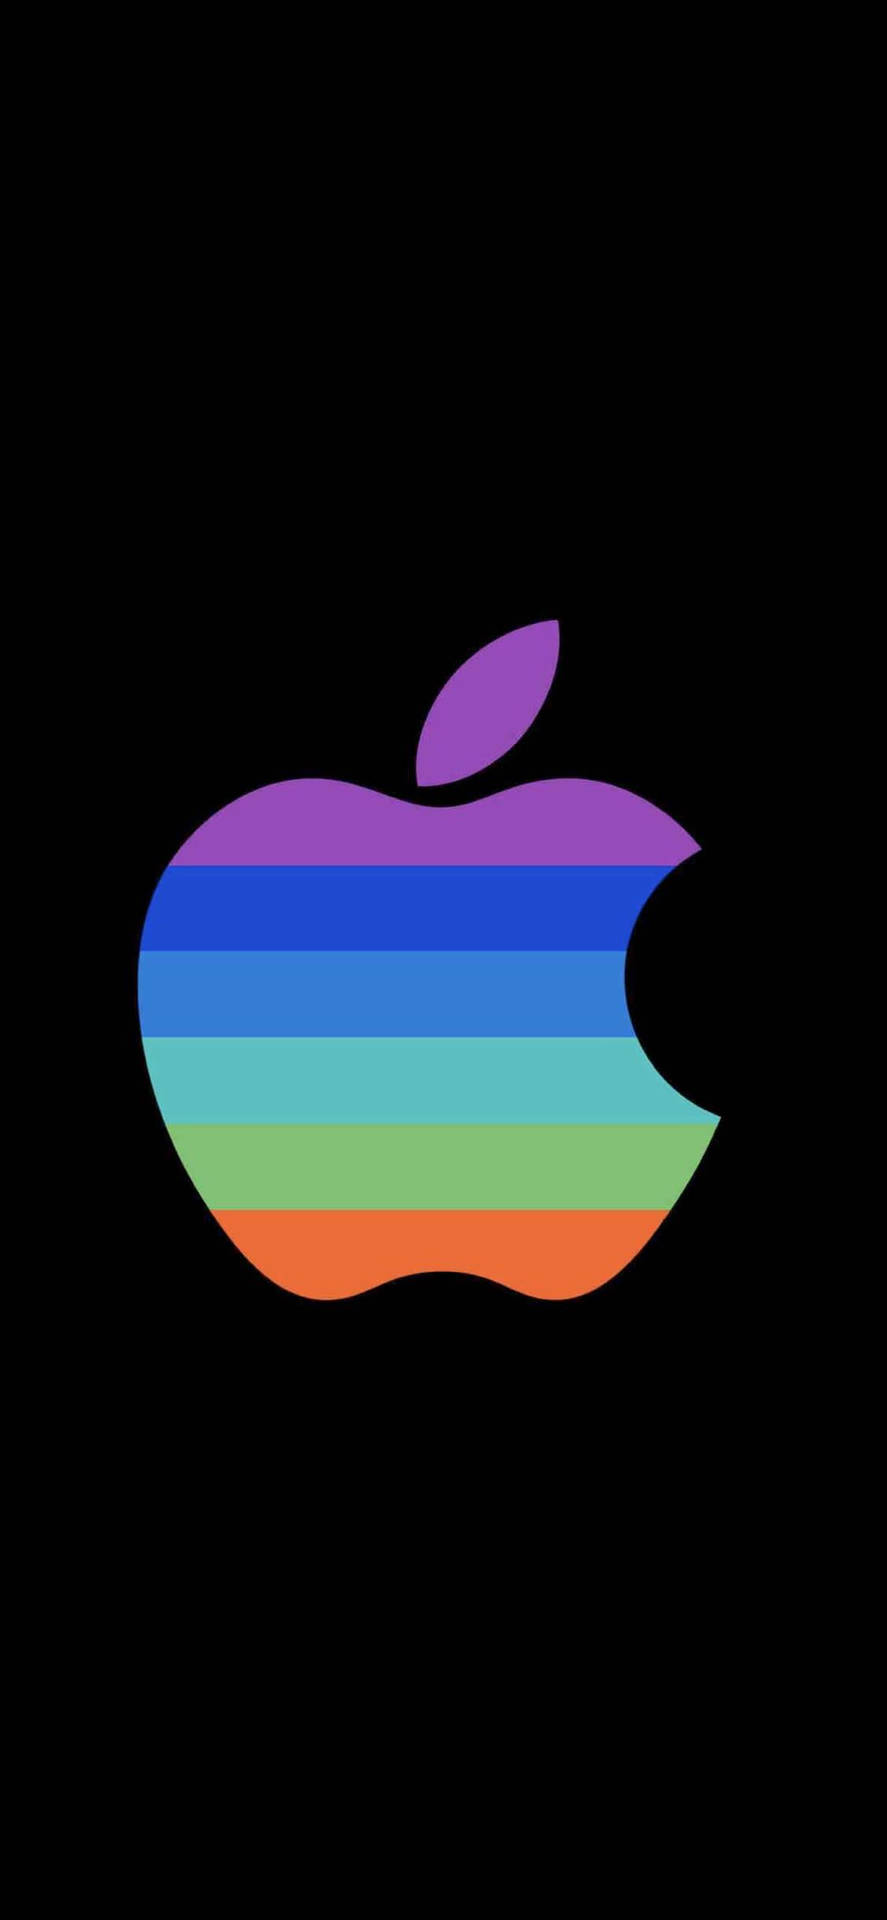 Bright Colorful Apple Logo Iphone Background